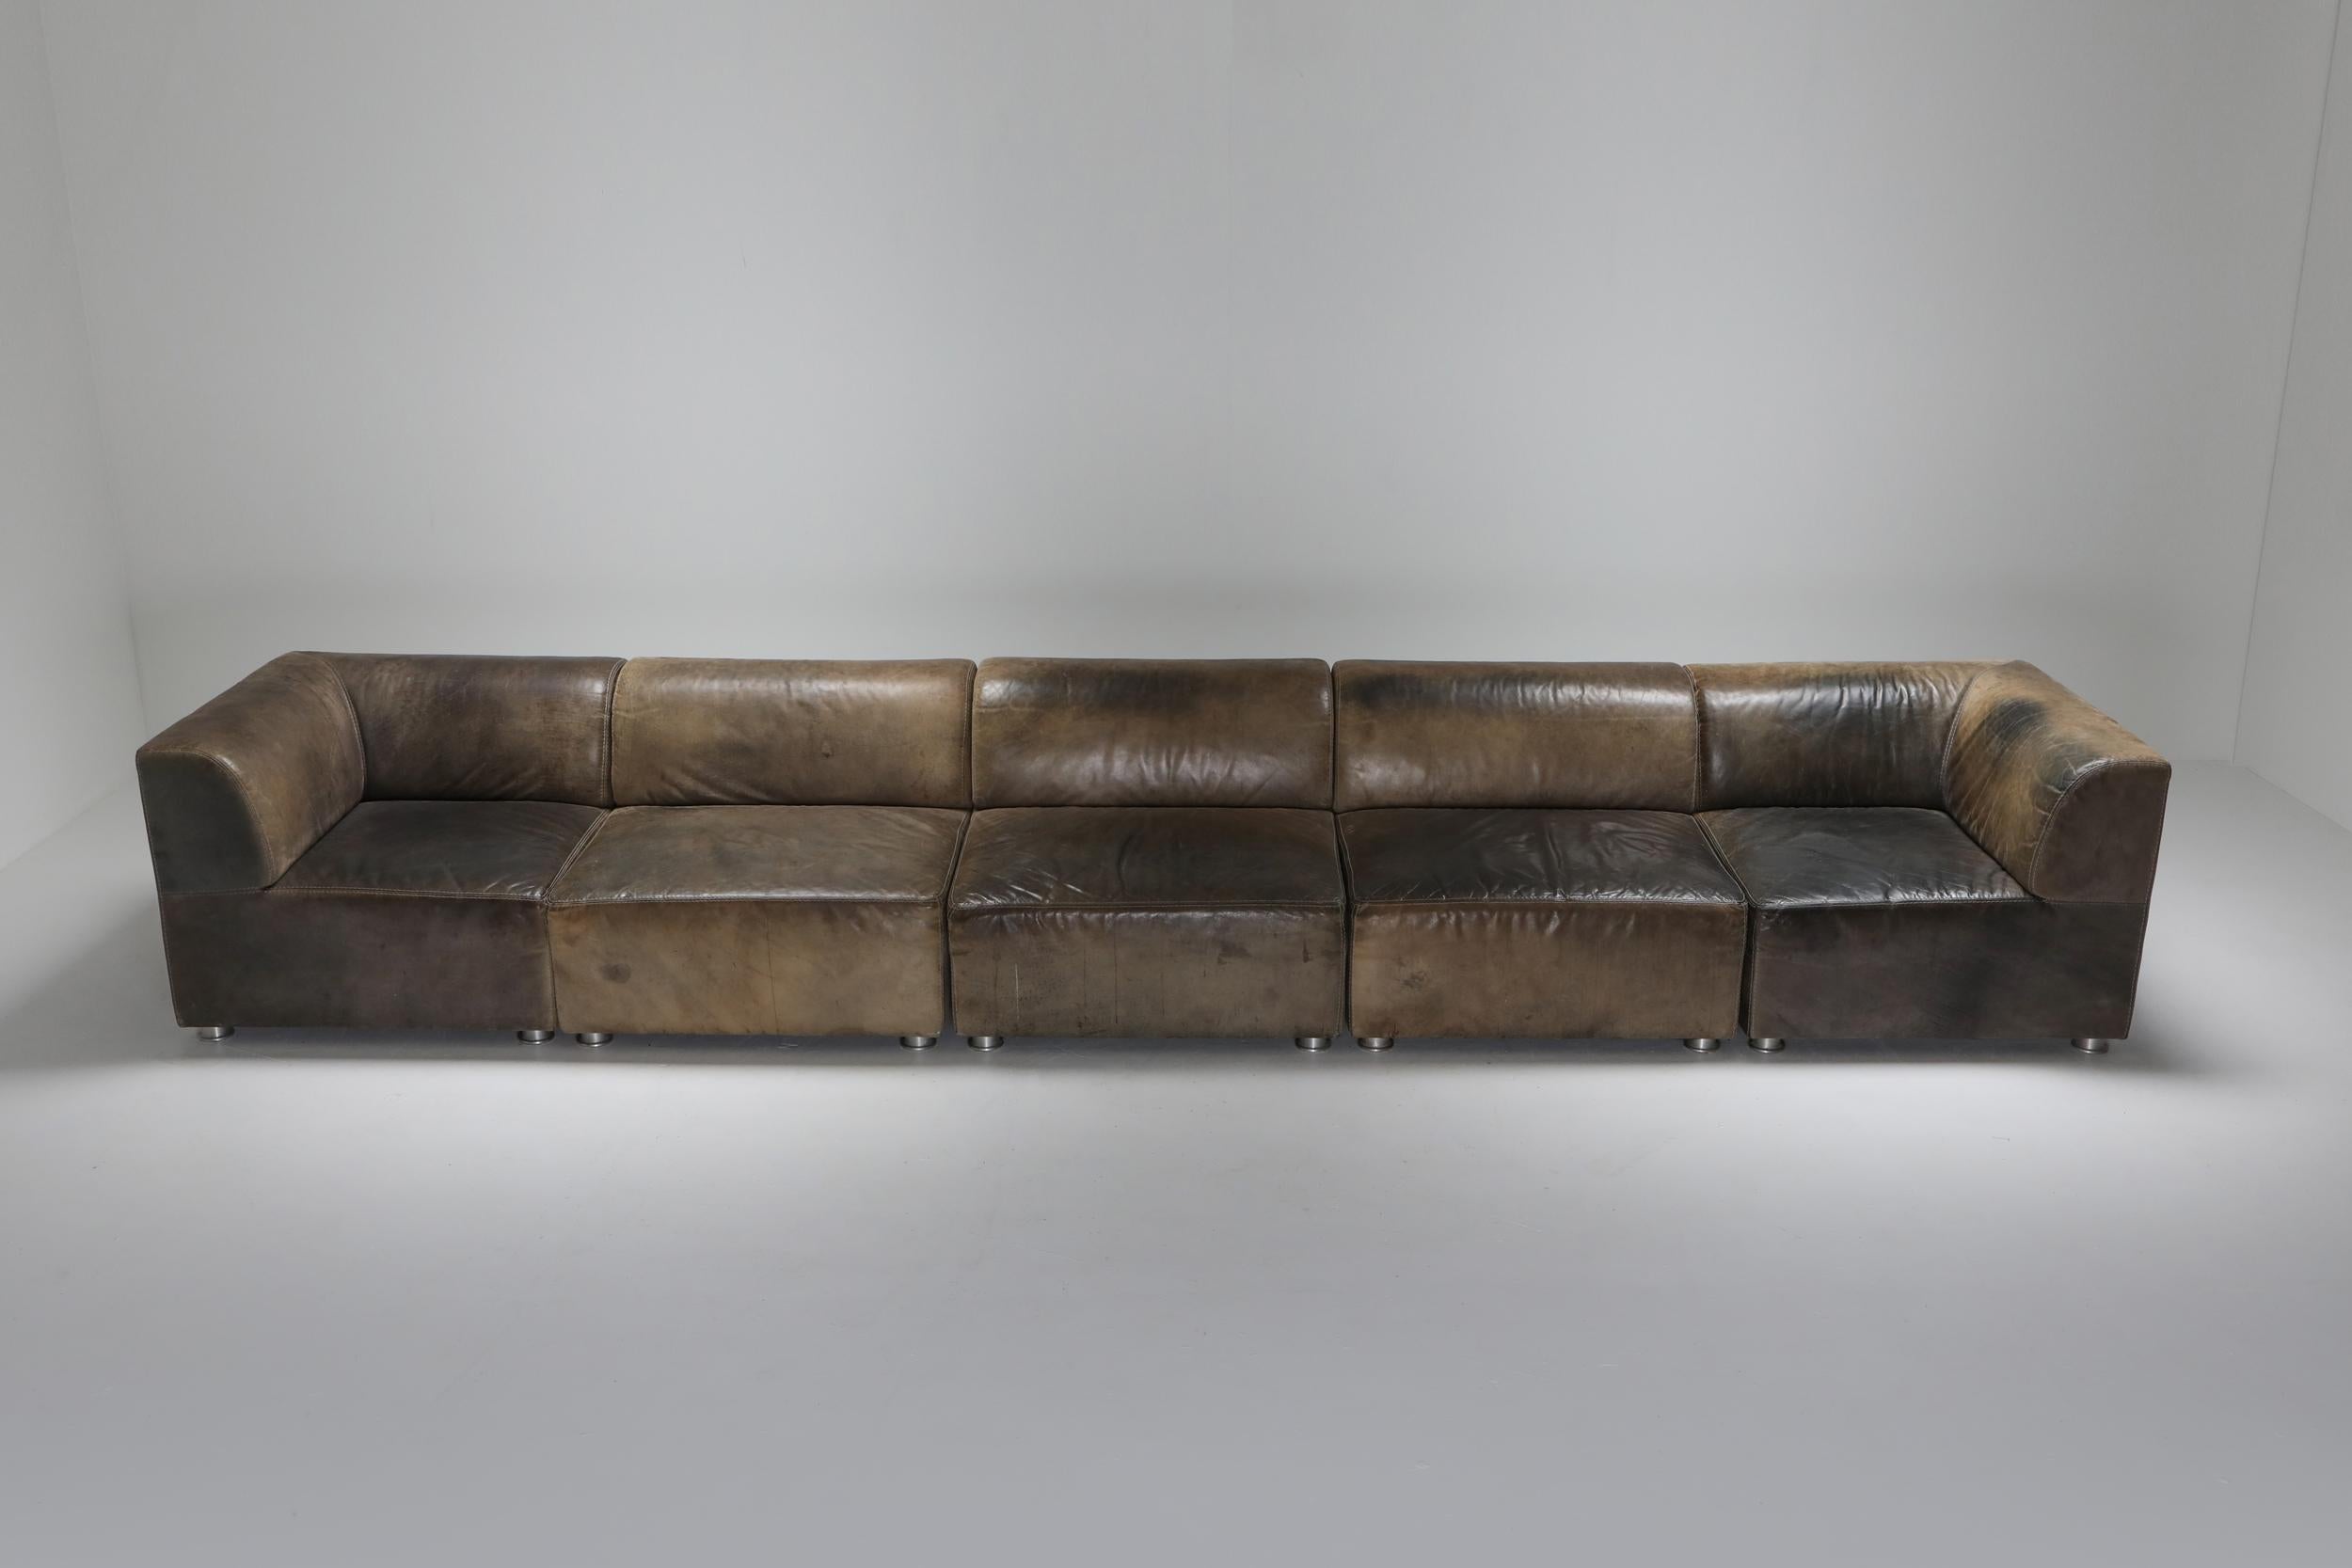 Leather couch in five sections, Belgium, 1980s
Two corner pieces provide quite a few set-up options.
You could even use it as a three-seat with two lounge chairs.
Made by luxury leather brand Durlet in Belgium in the 1970s.
The patina on the